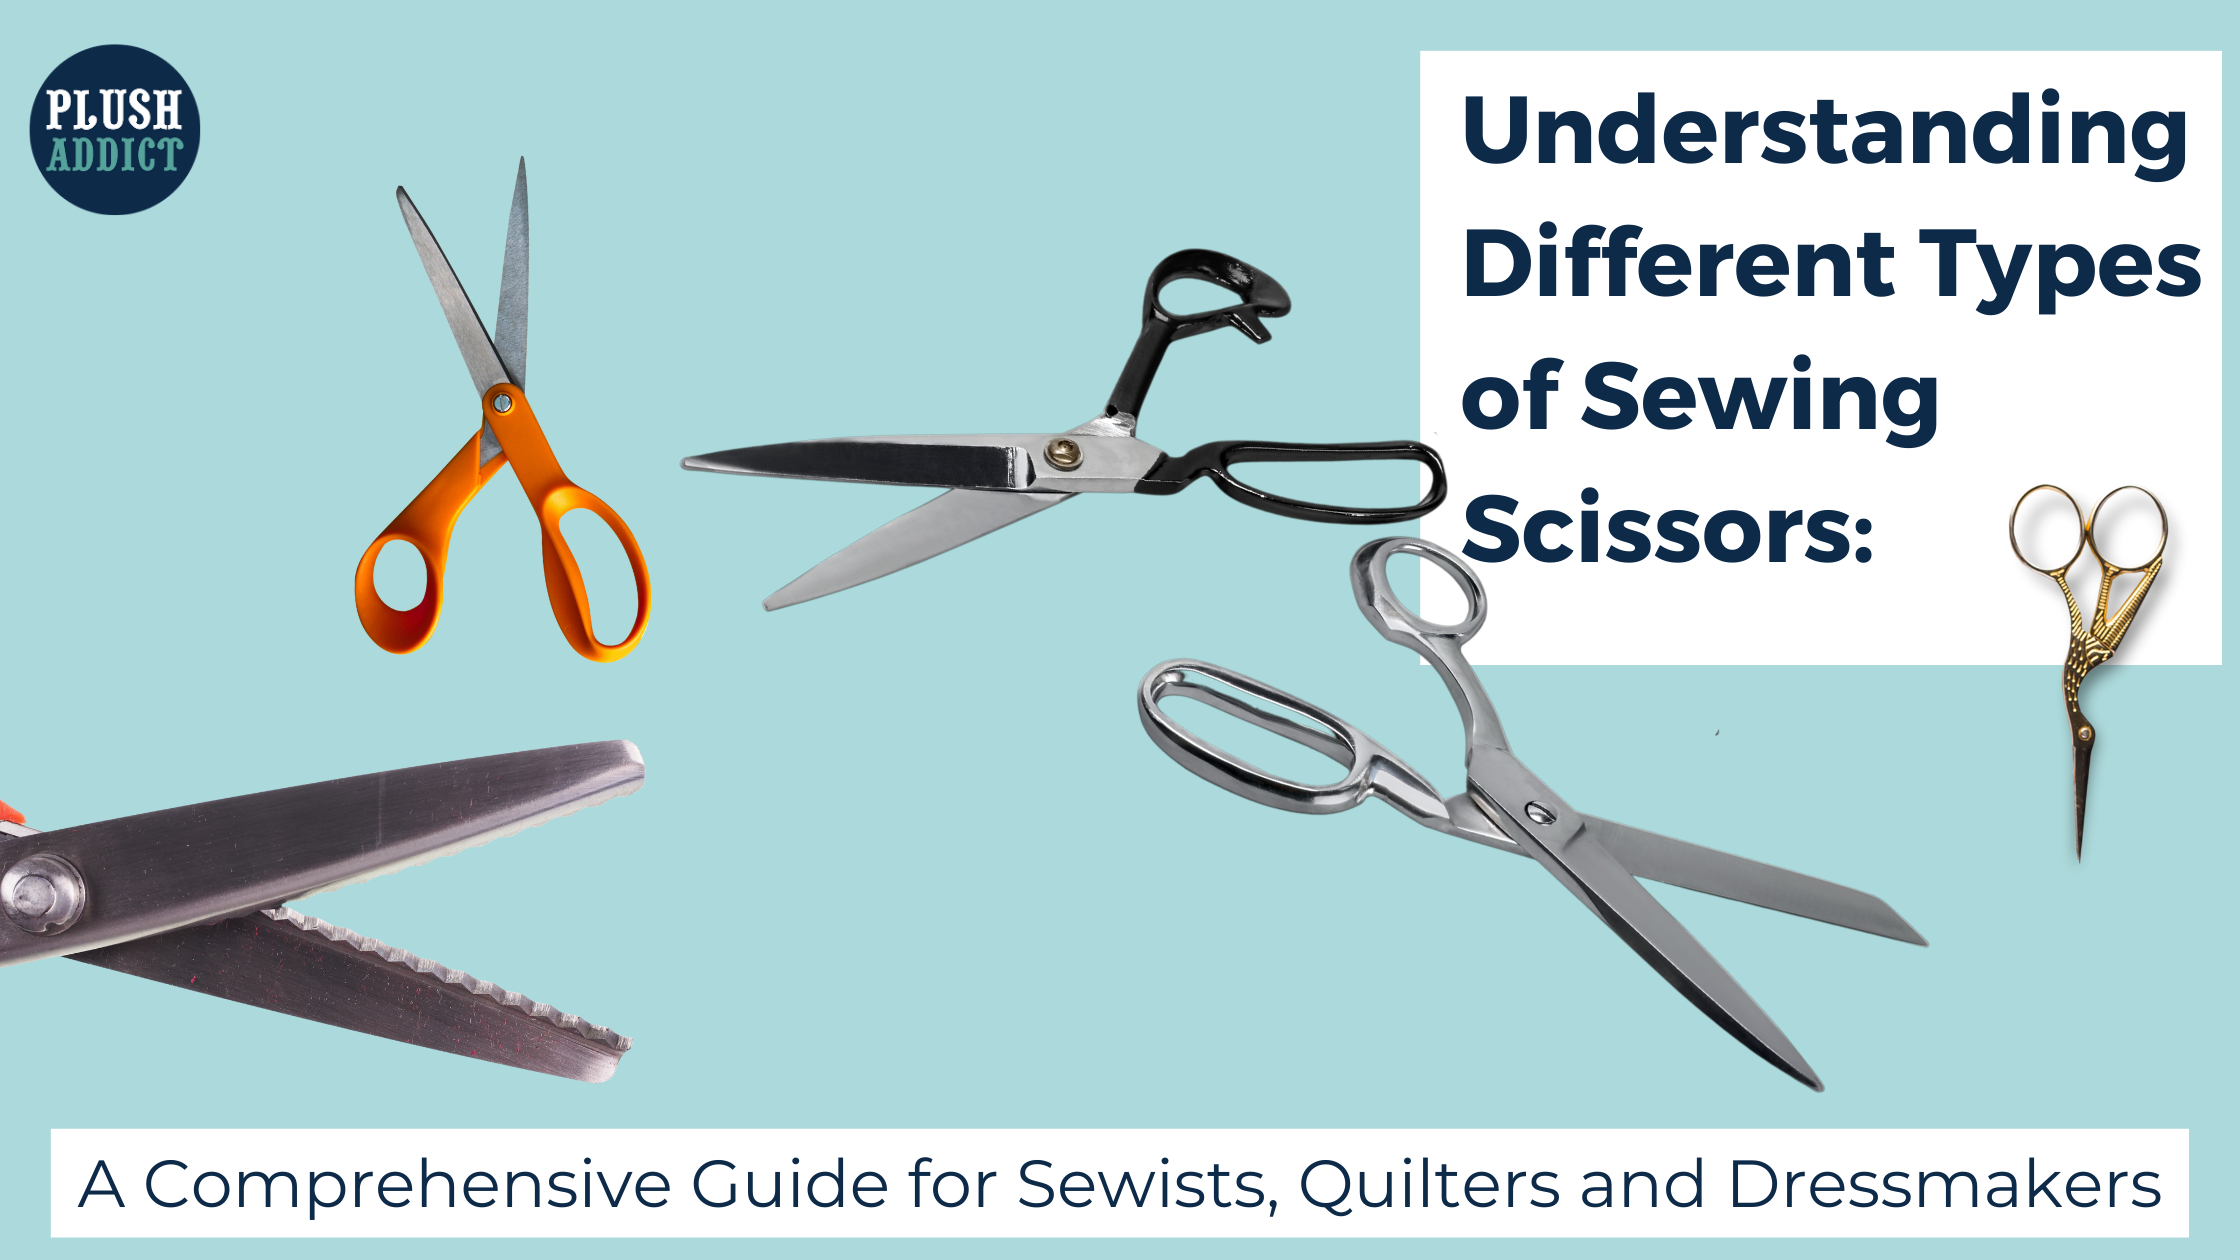 The 5 Different Types of Scissors You NEED in Your Craft Room